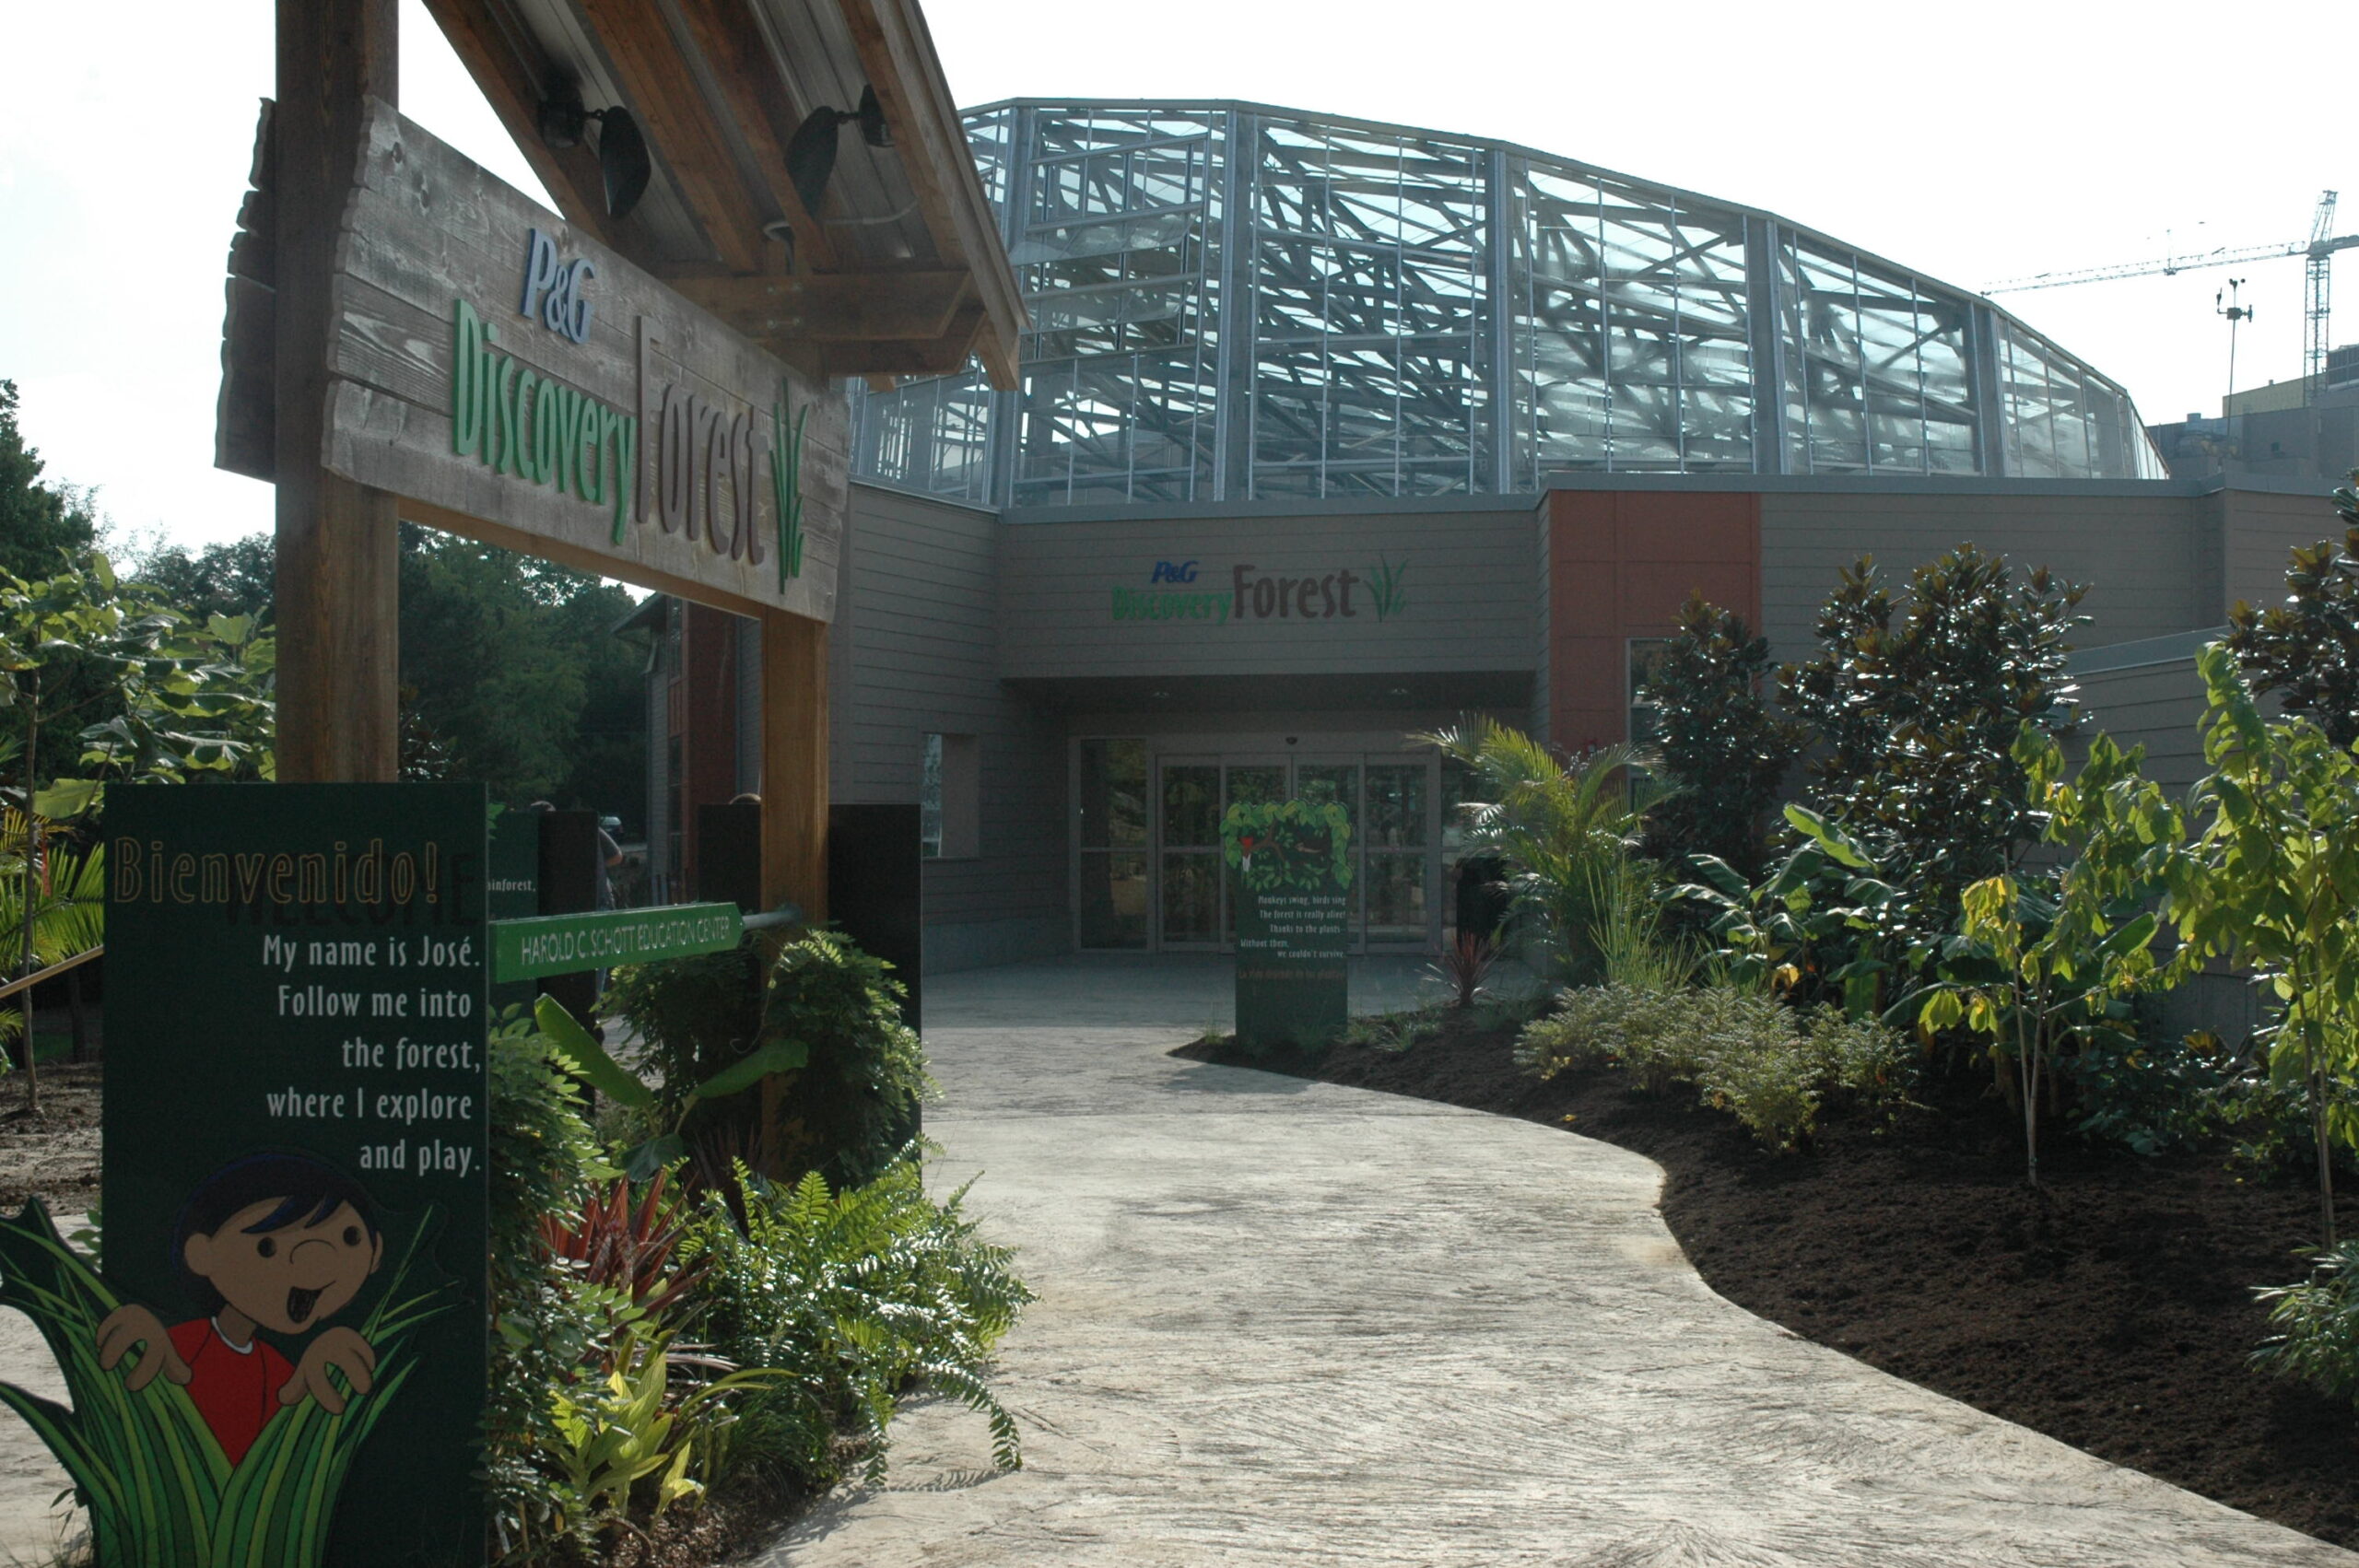 Discovery Forest Entrance